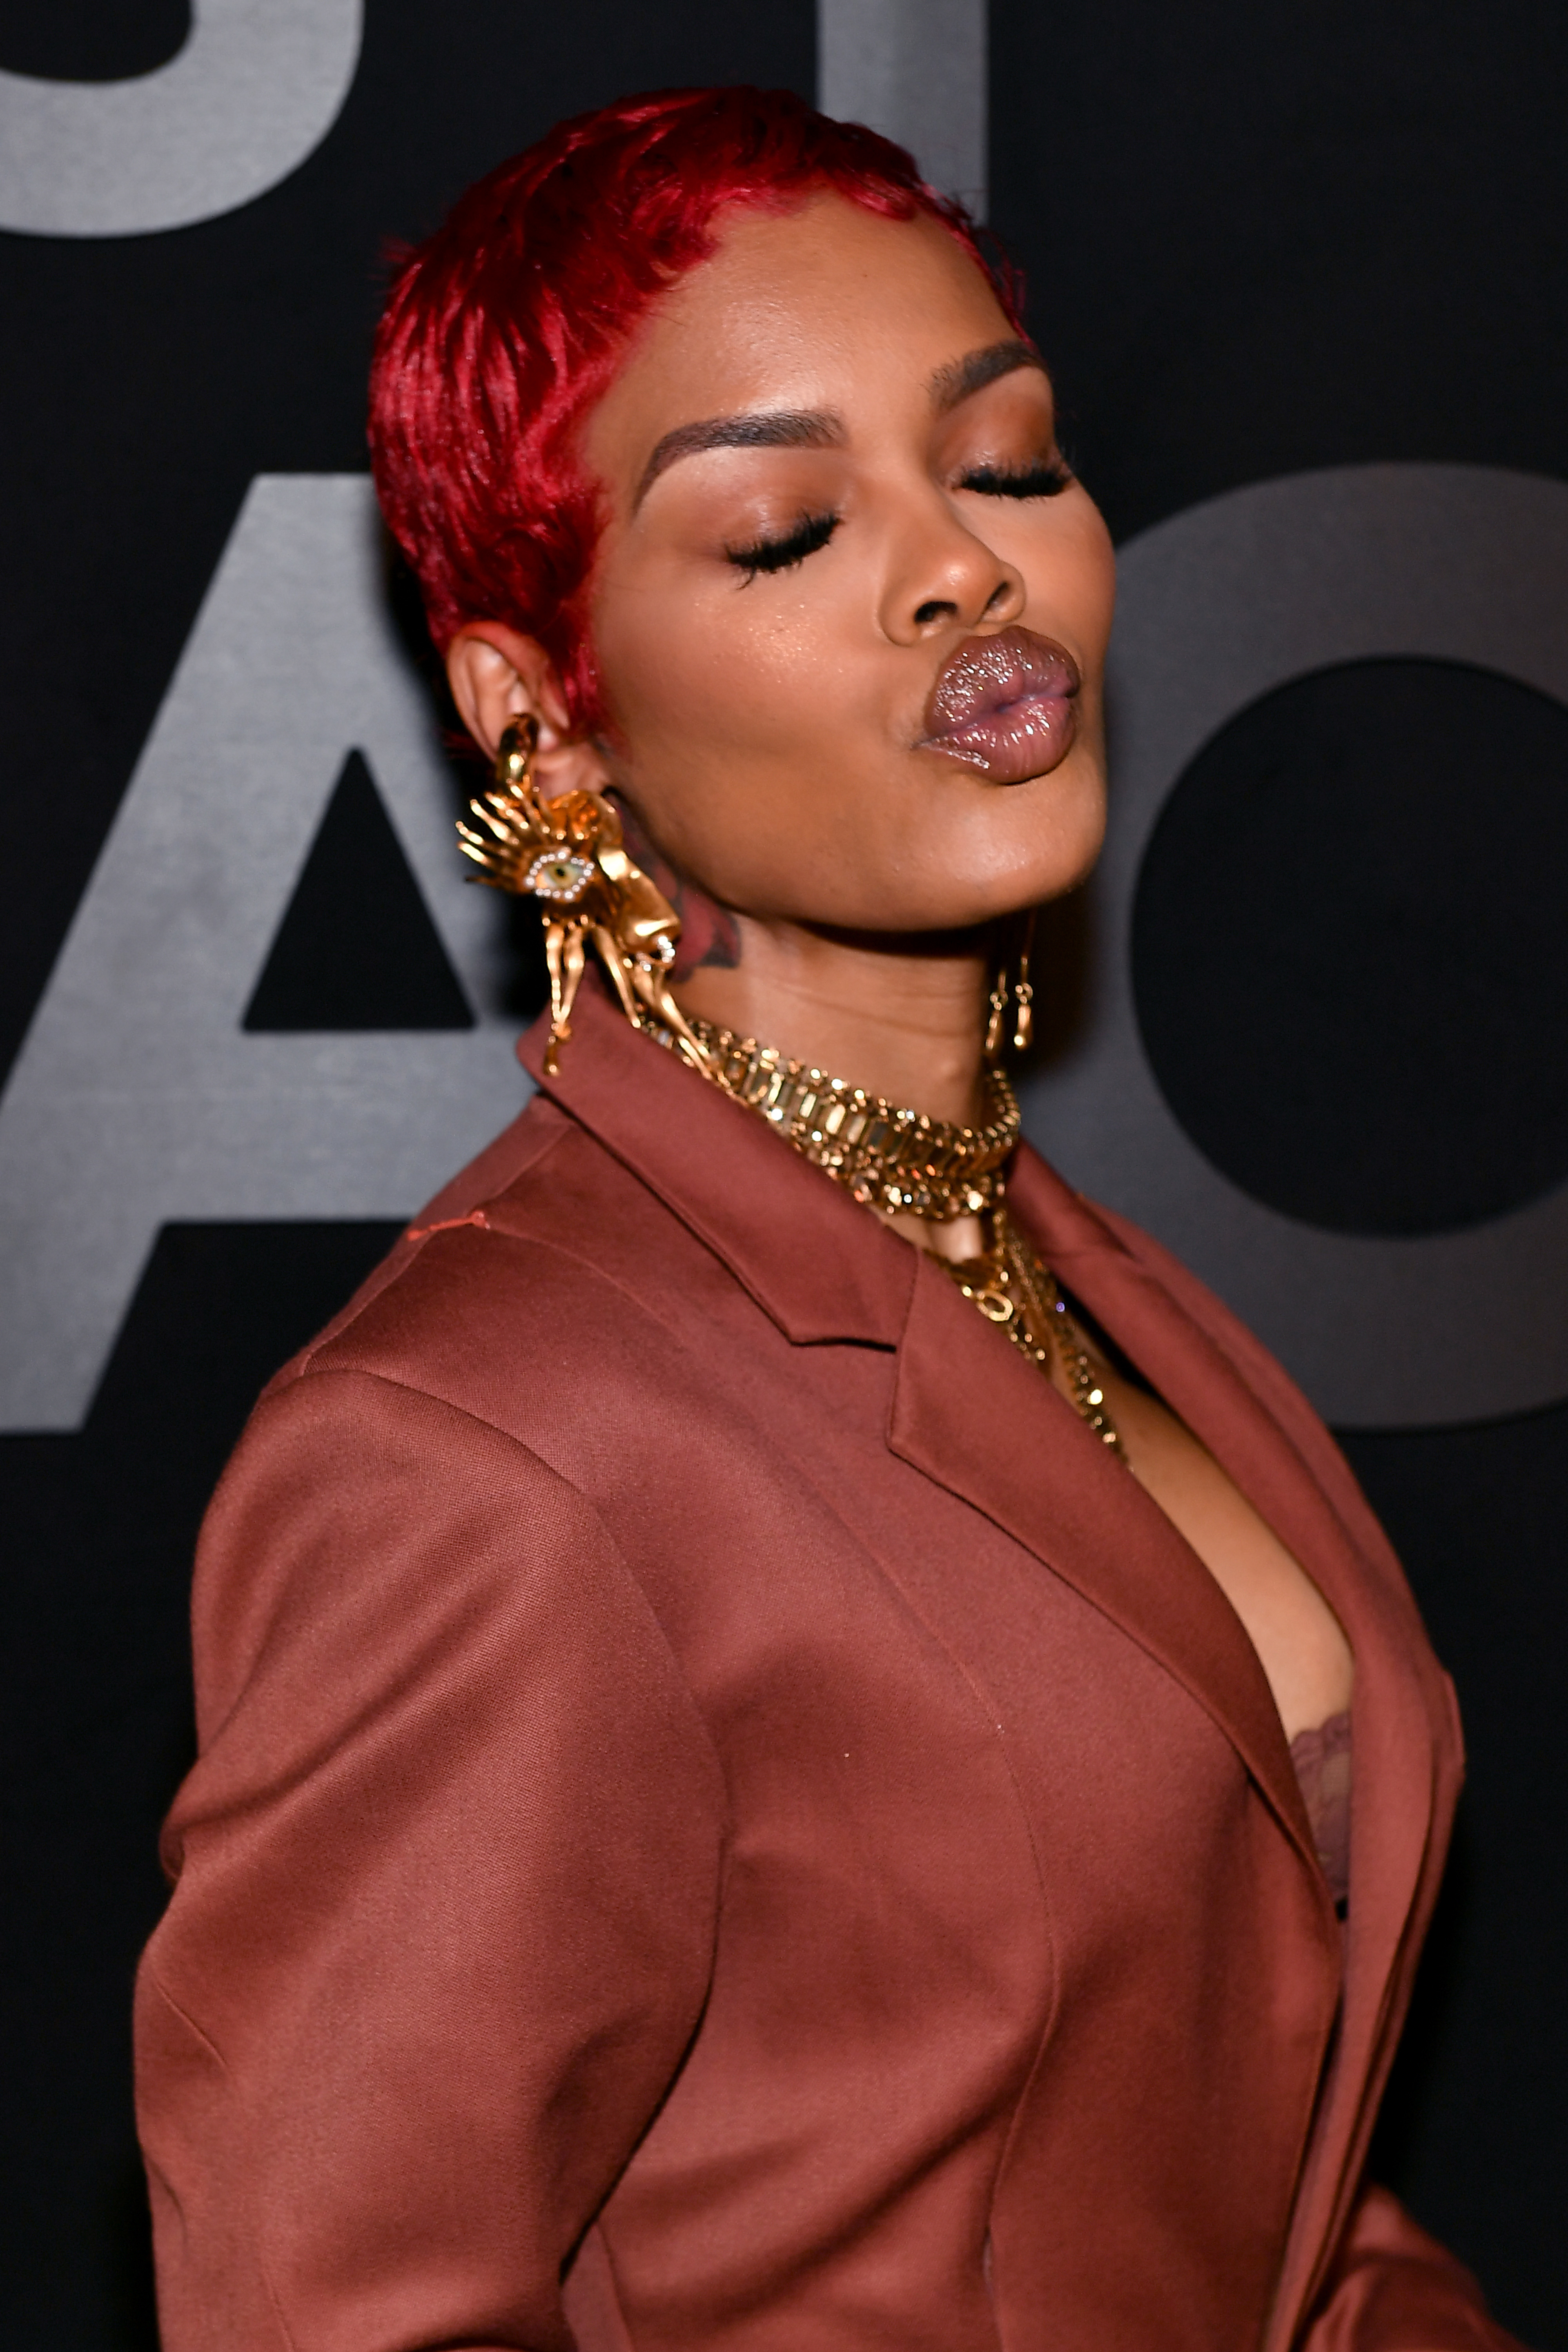 Closeup of Teyana Taylor pursing her lips as if giving a kiss to the camera